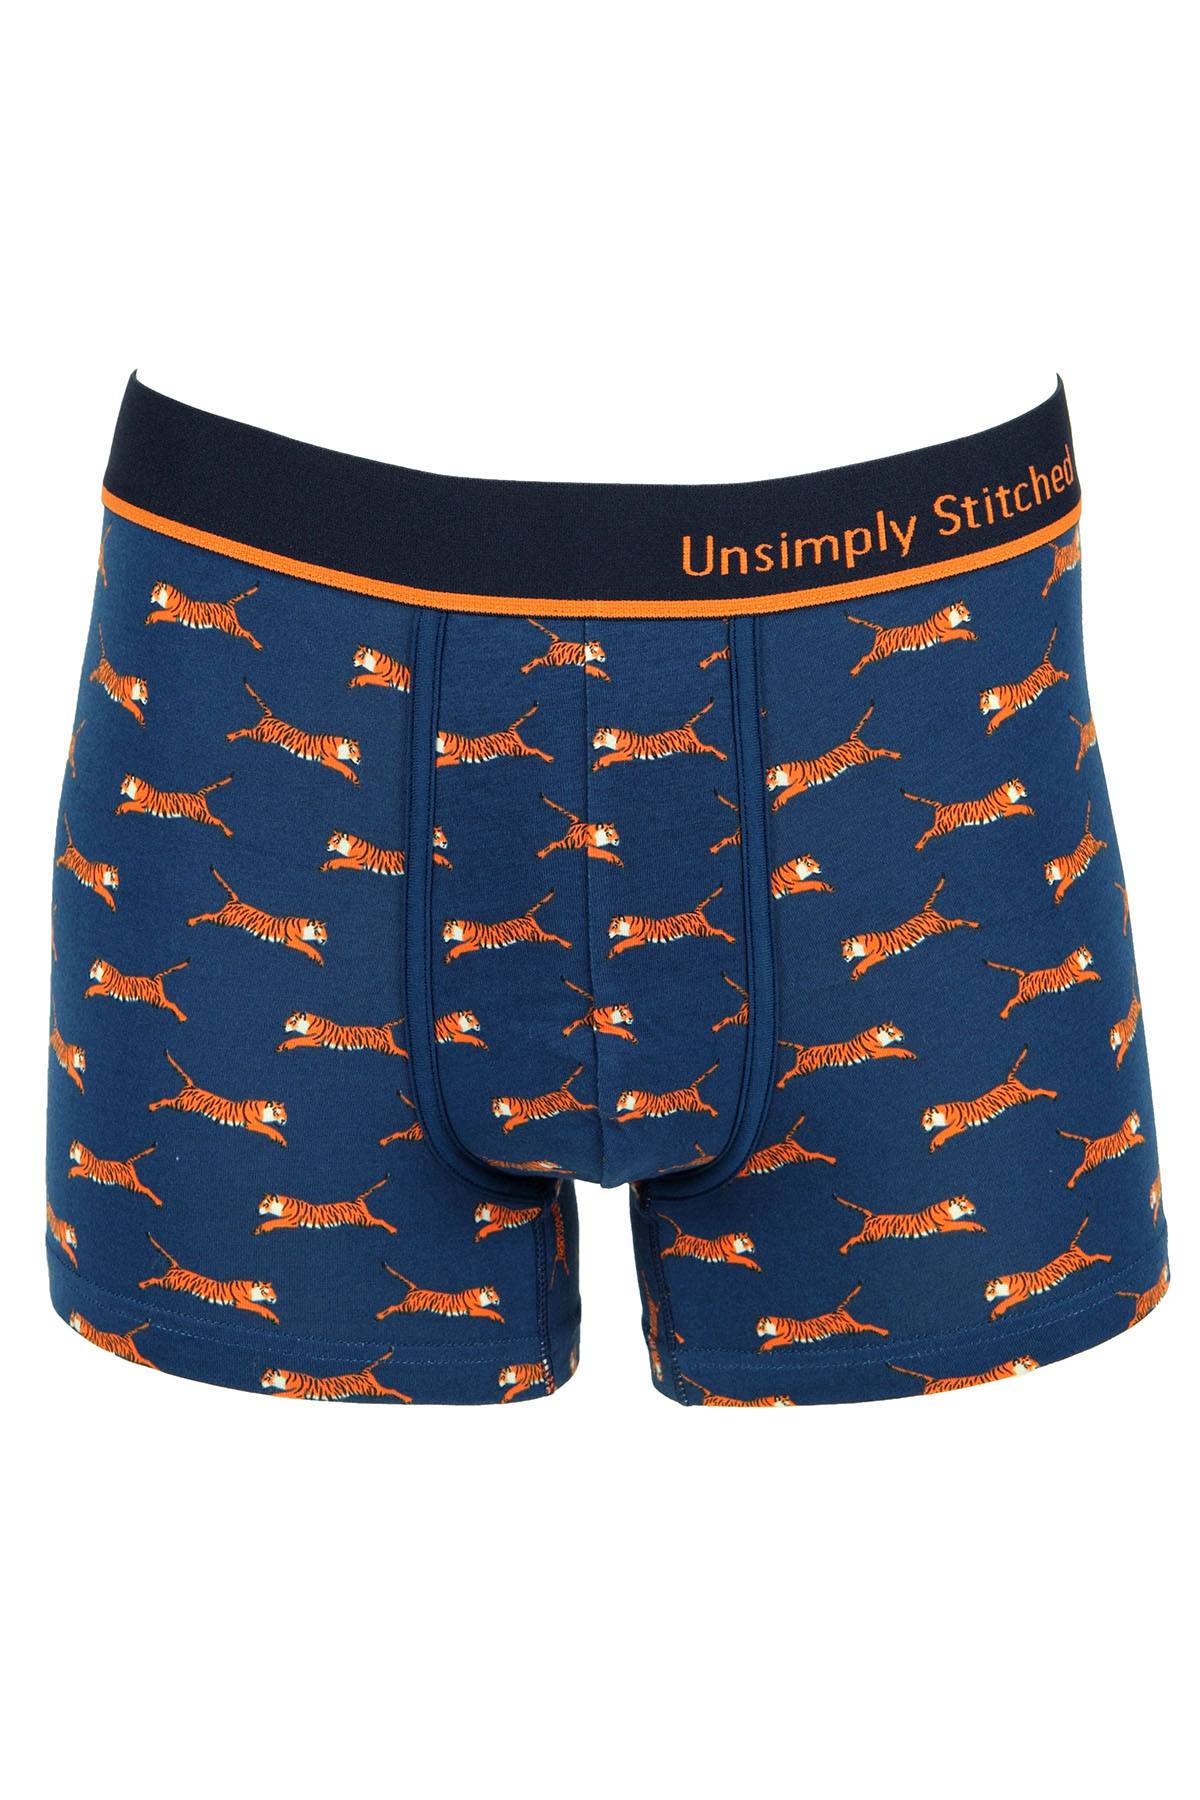 Unsimply Stitched Blue Tiger Trunk